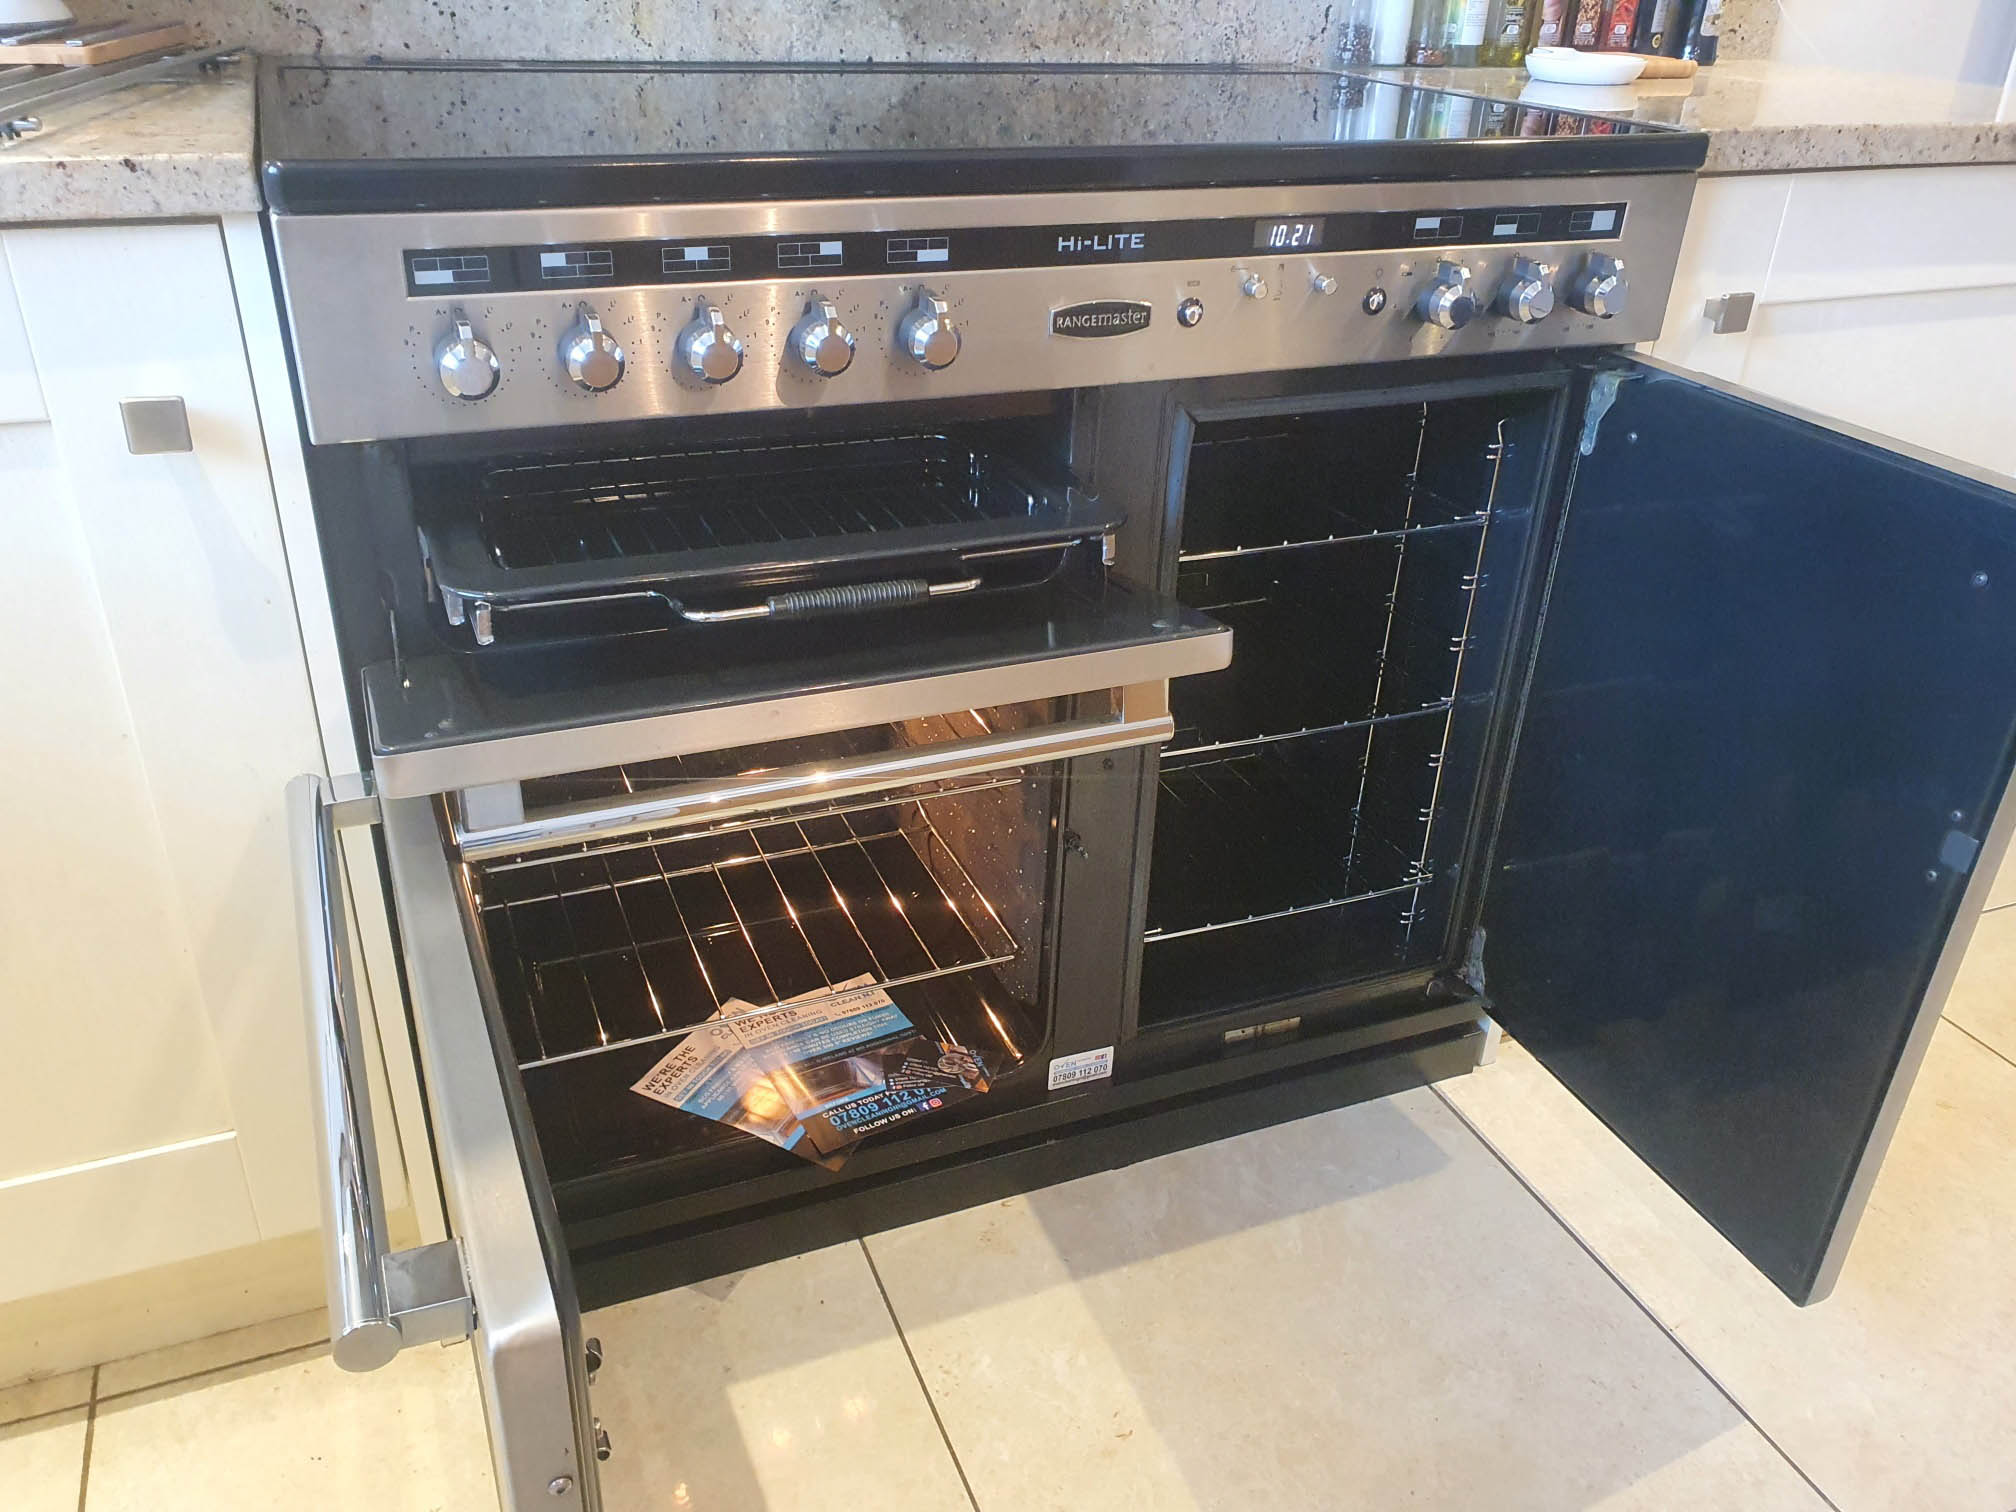 Double Oven Clean Newtownards | Clean Oven Belfast | Oven Cleaning NI | Oven Clean ni | Kitchen Cleaning NI | Oven Cleaning Belfast | Kitchen Appliance Cleaning Belfast | Oven Clean NI